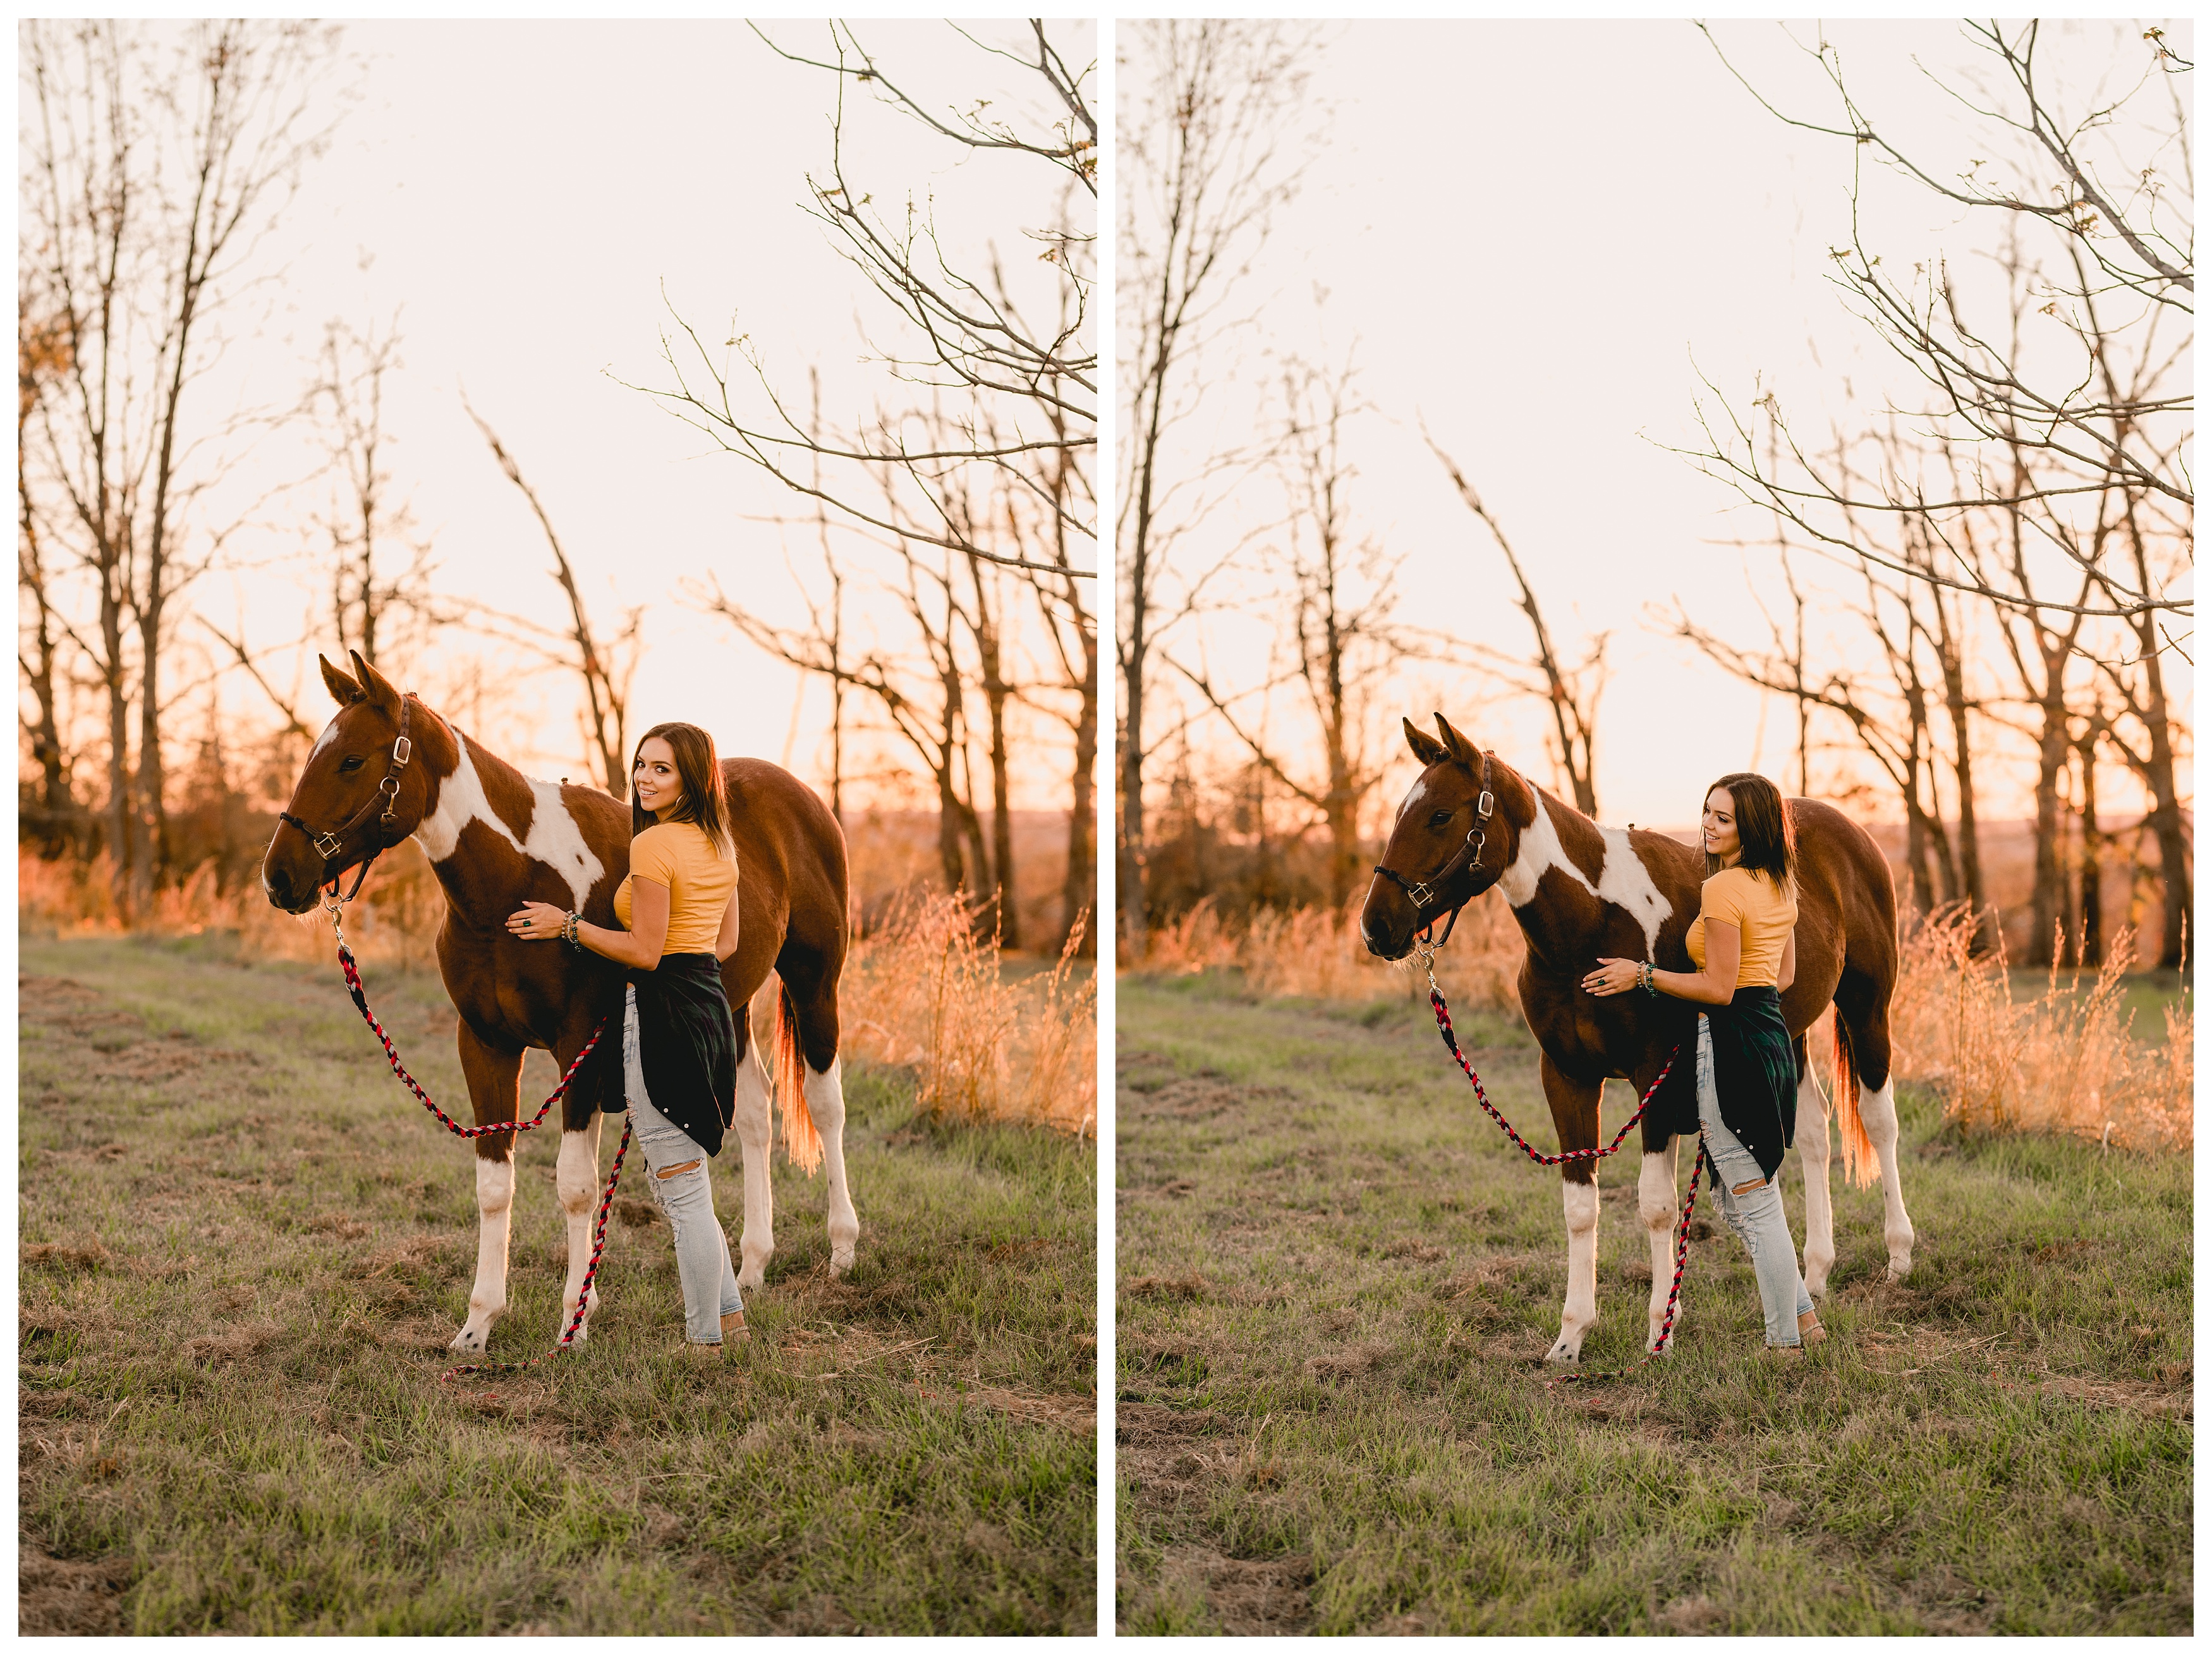 Sunset photos of horse and girl taken in the panhandle of Florida. Shelly Williams Photography